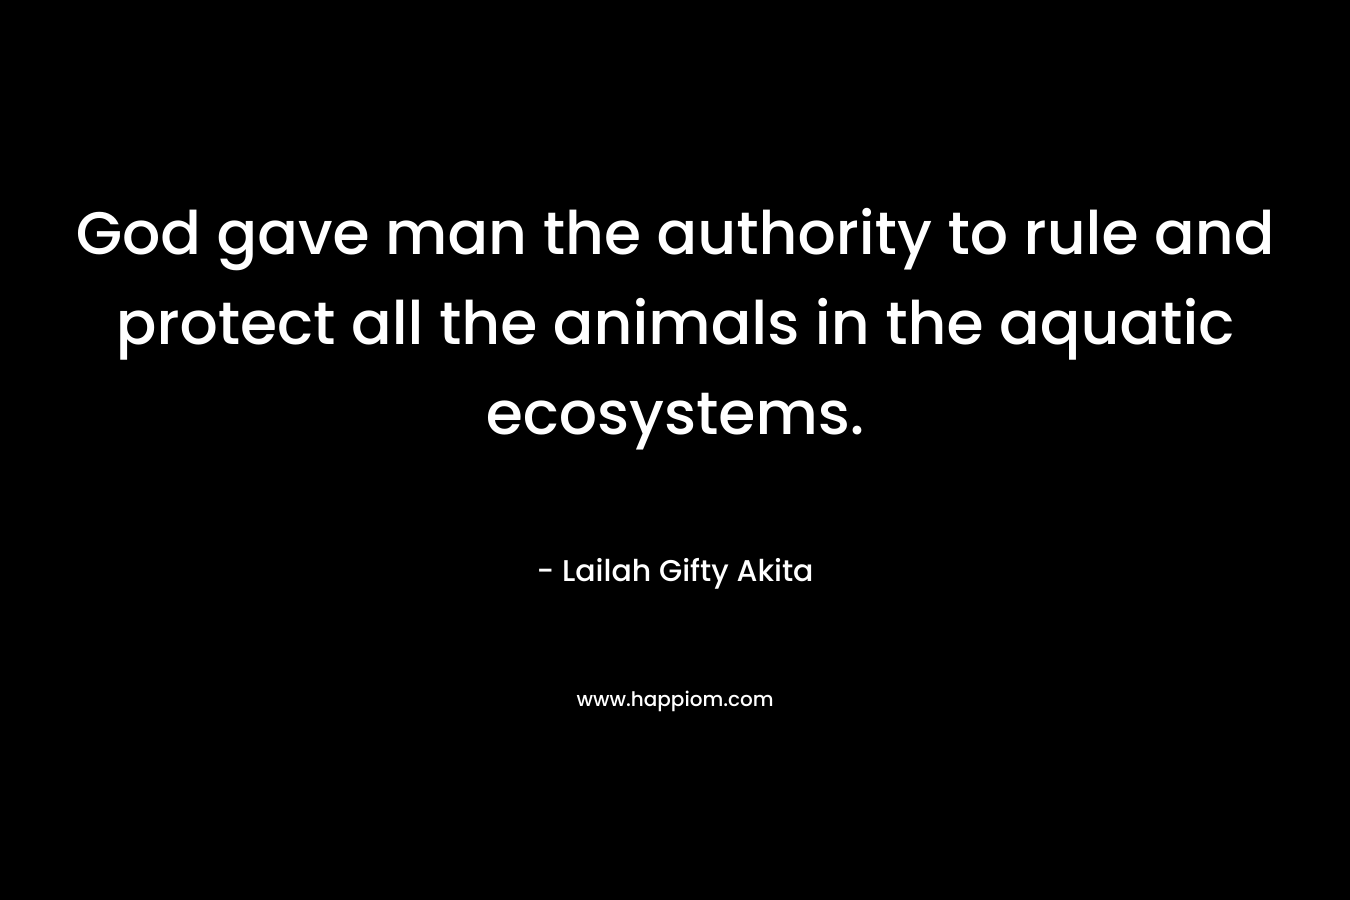 God gave man the authority to rule and protect all the animals in the aquatic ecosystems.